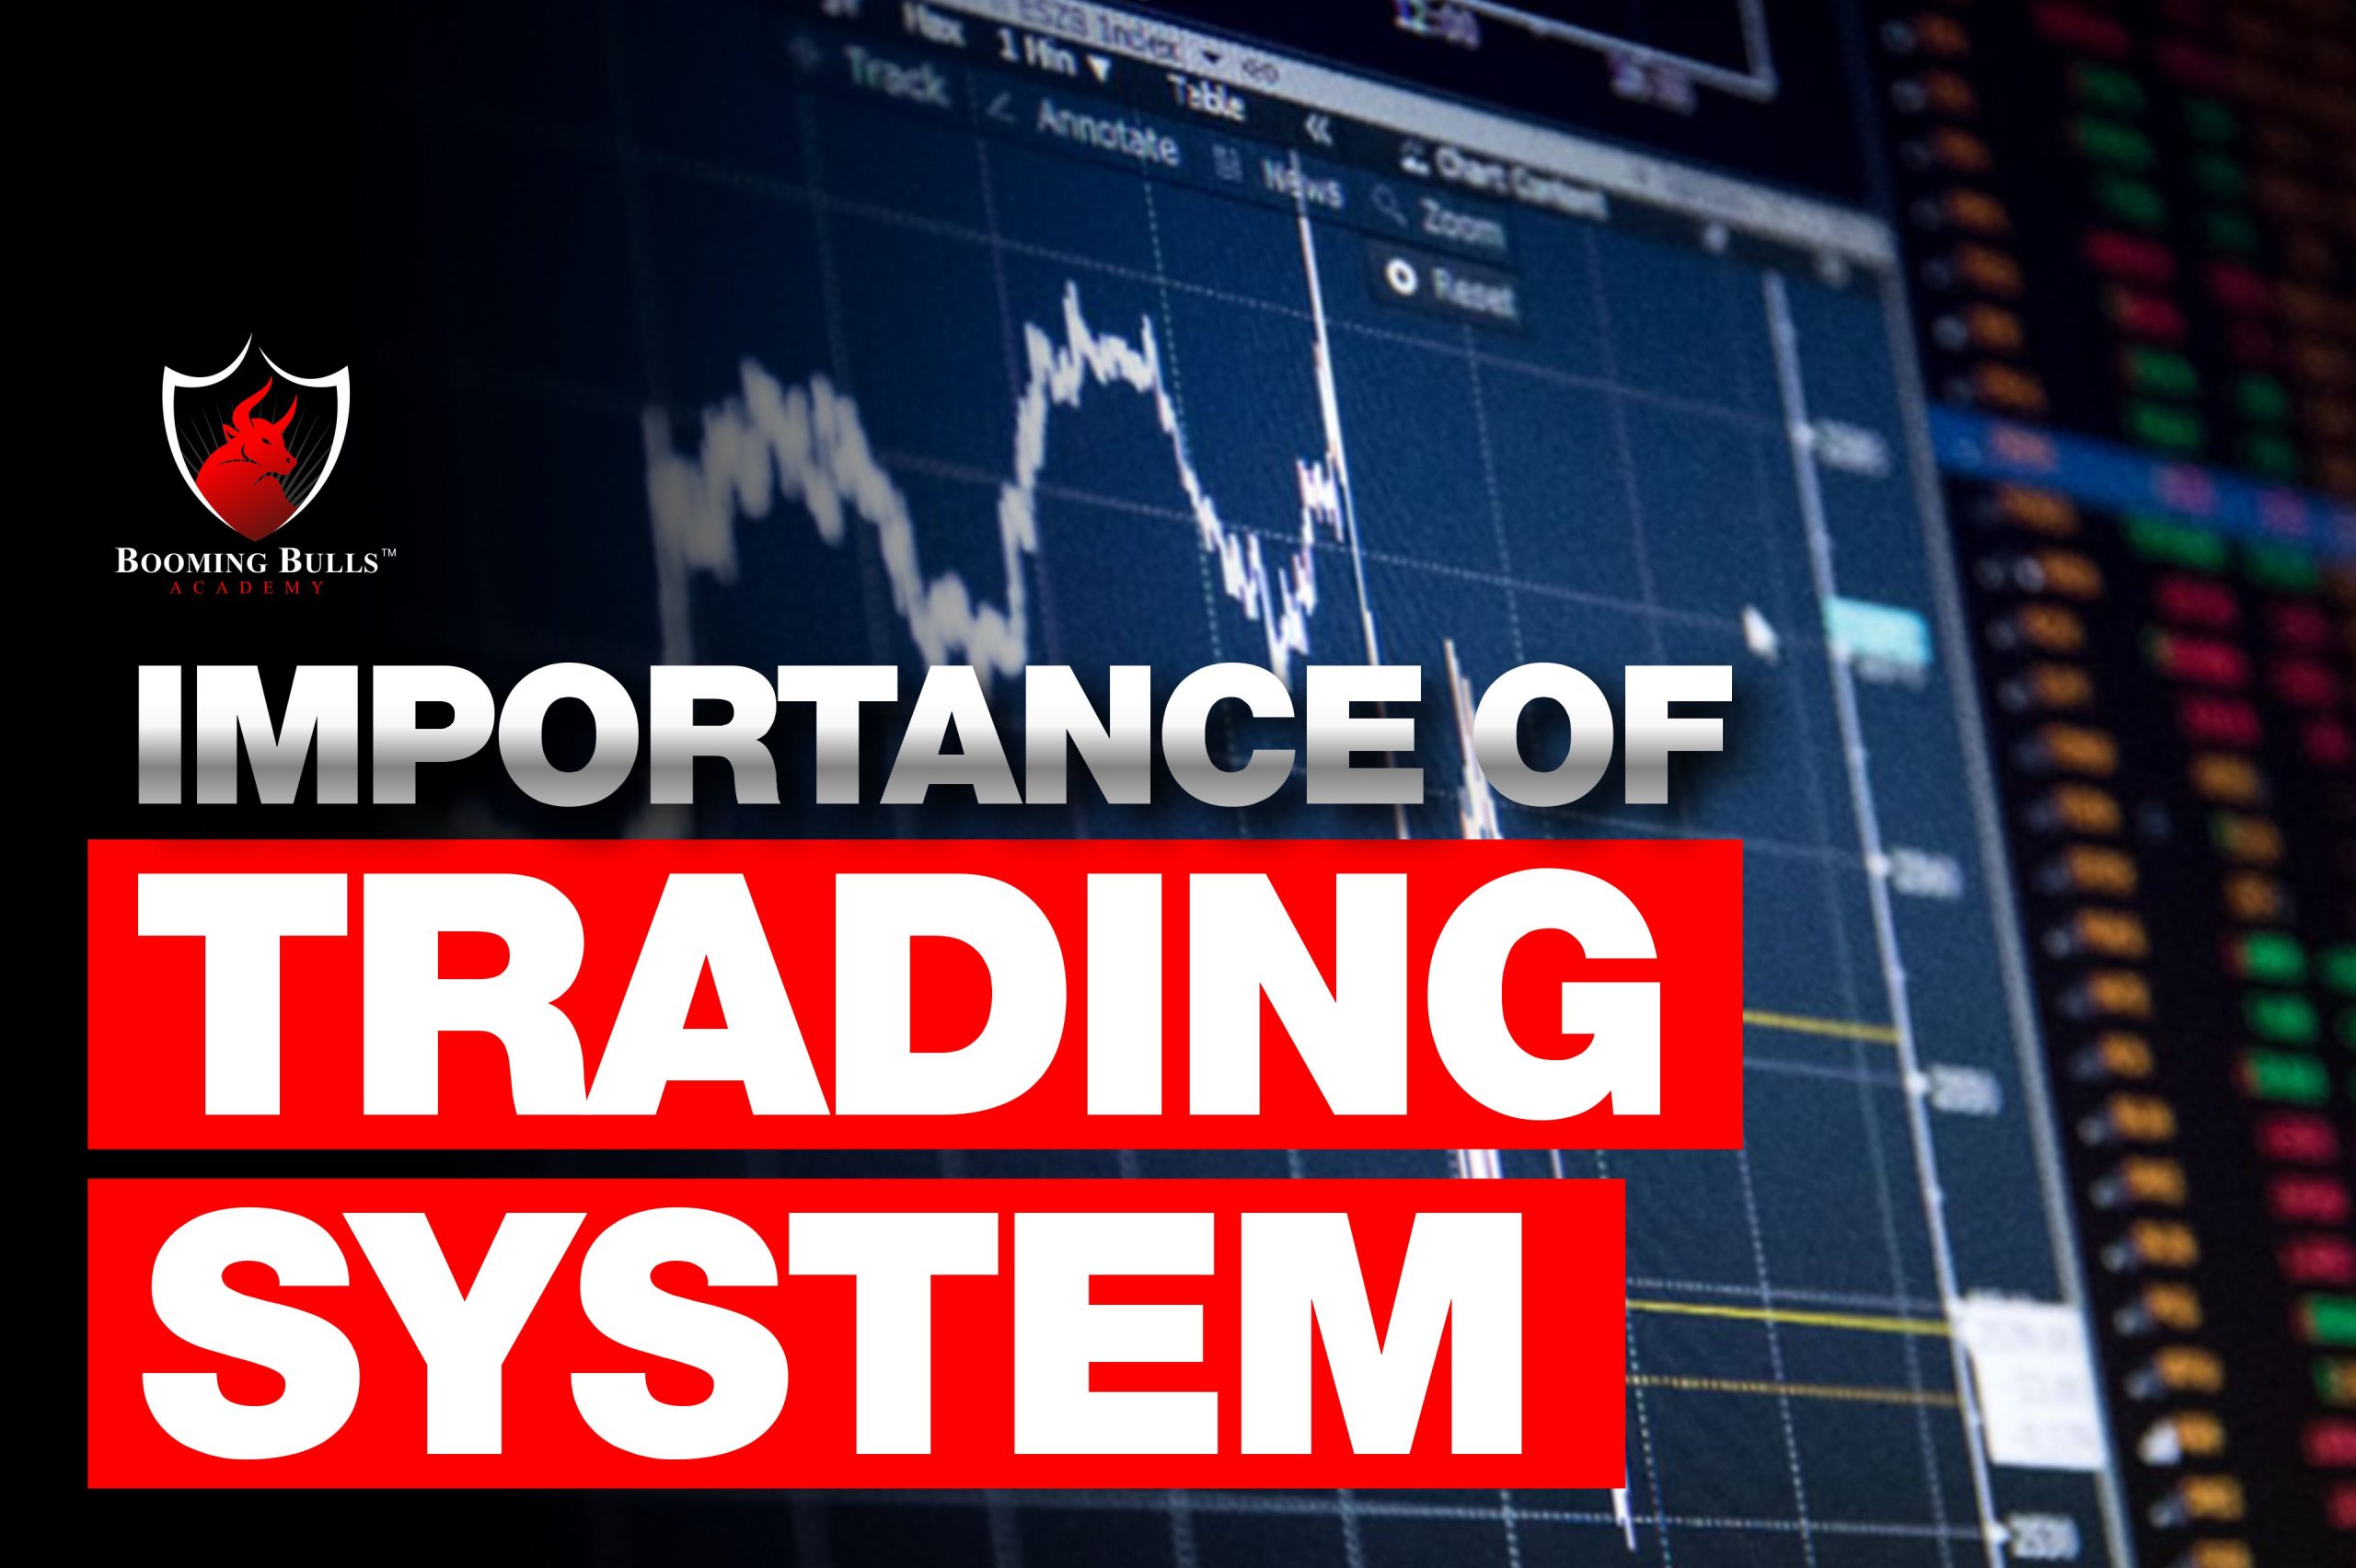 Importance Of Trading System